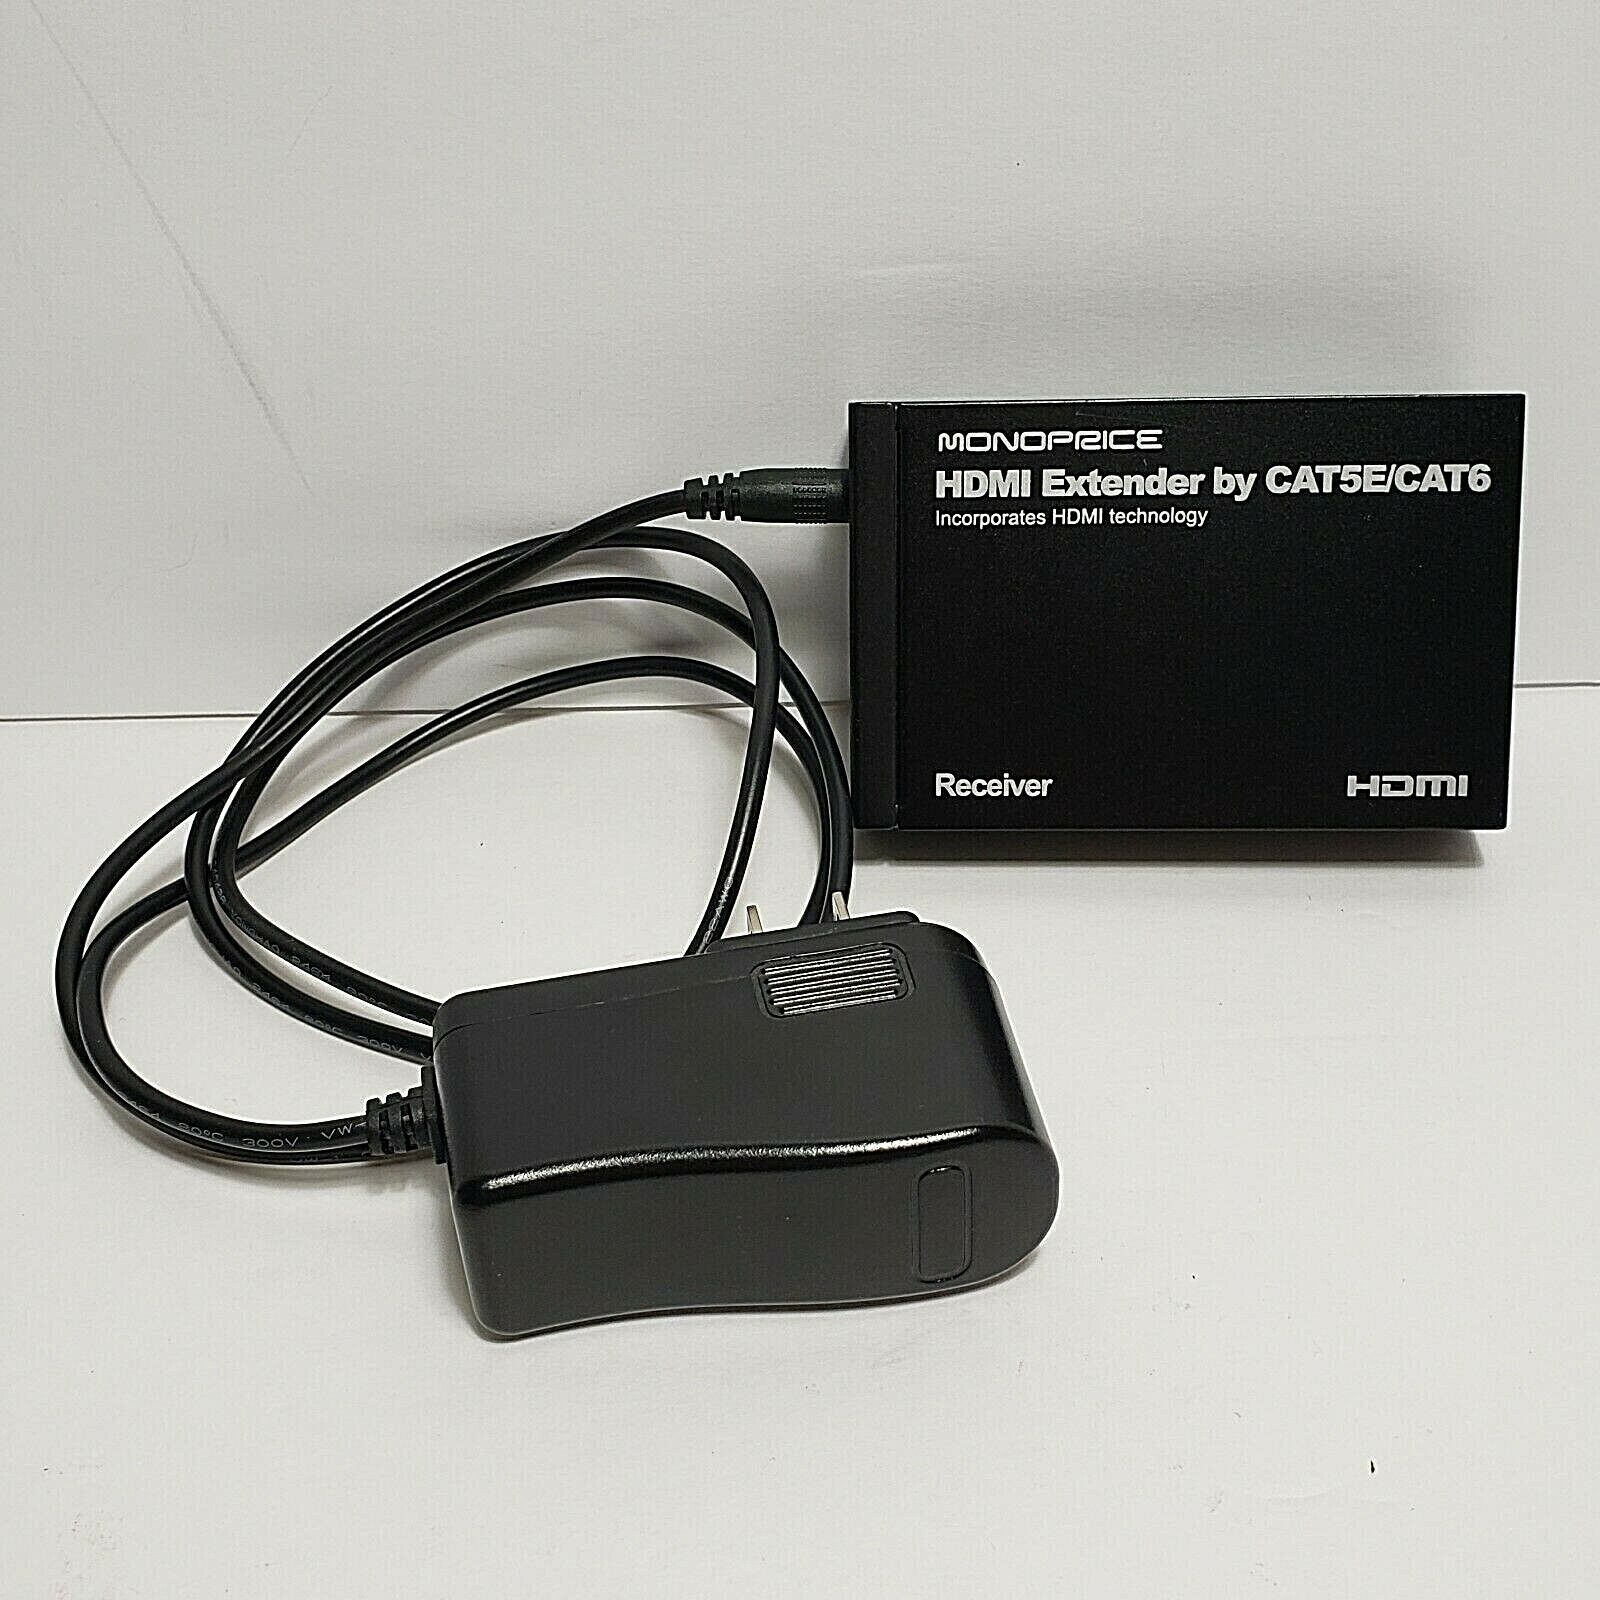 Monoprice Hdmi Extender Receiver Cat5e/cat6 With Power Supply